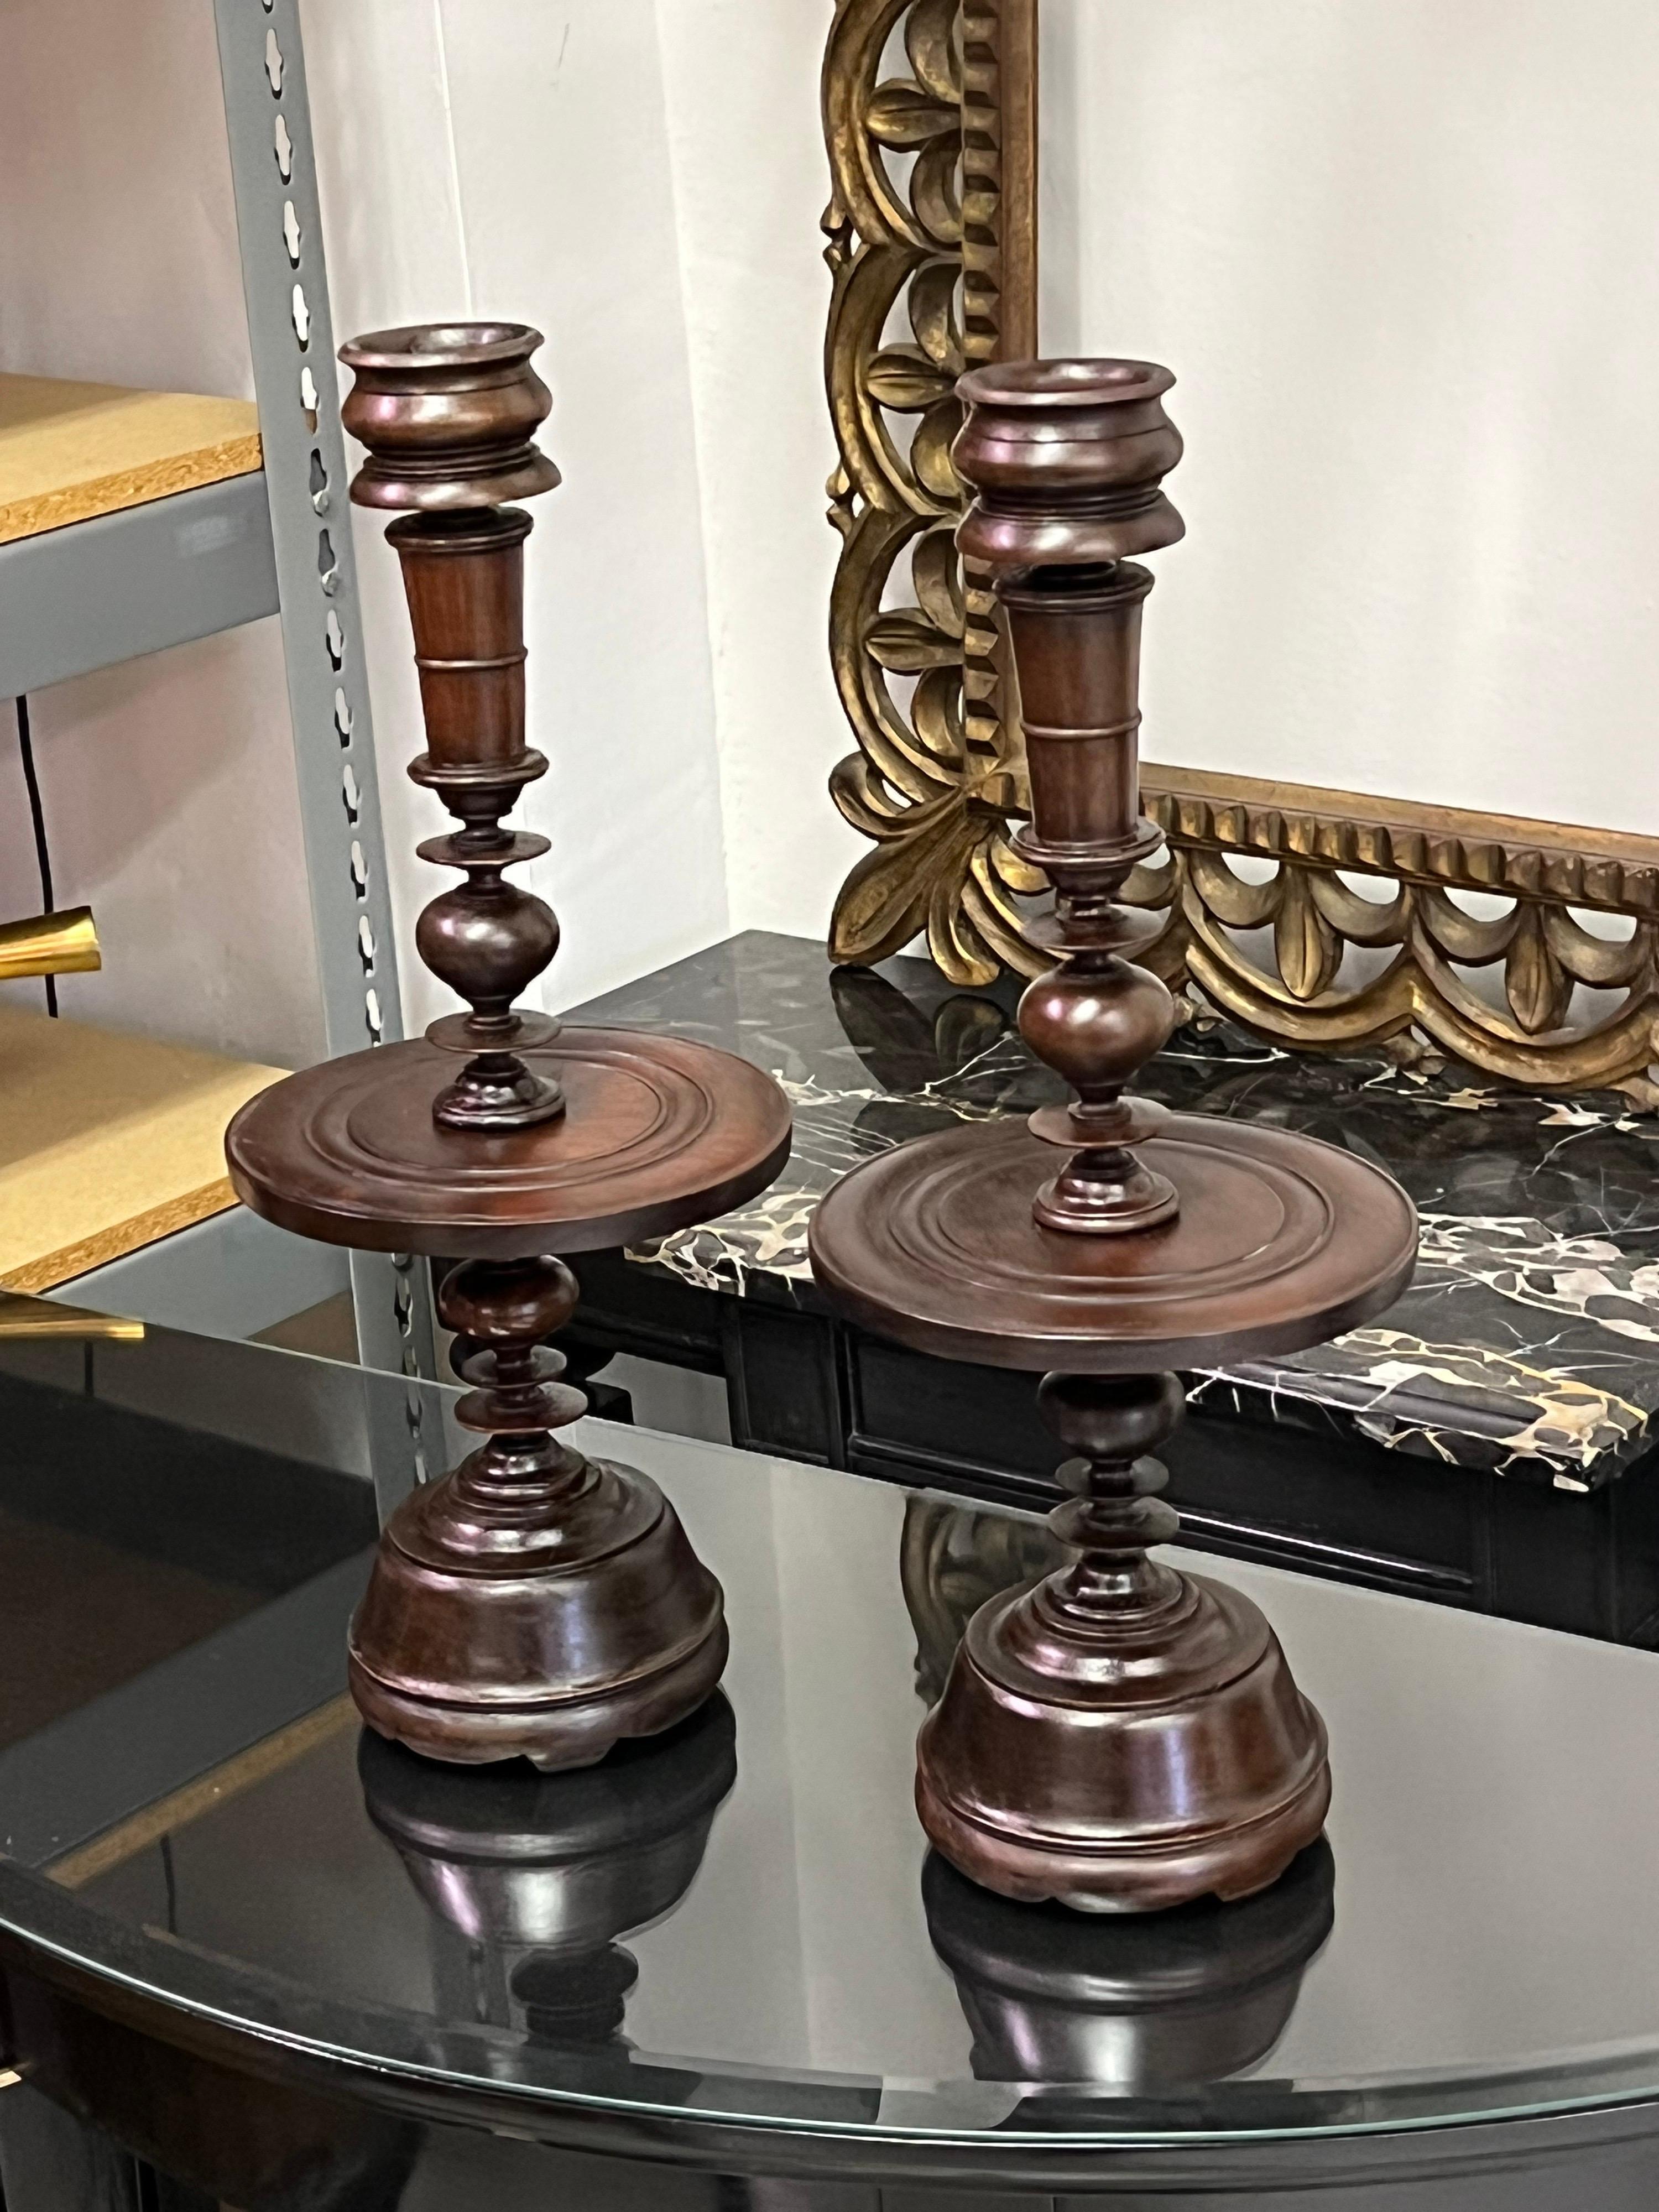 Pair of French Colonial Carved Teak Wood Table Lamp Bases or Candelabras c. 1930 For Sale 5